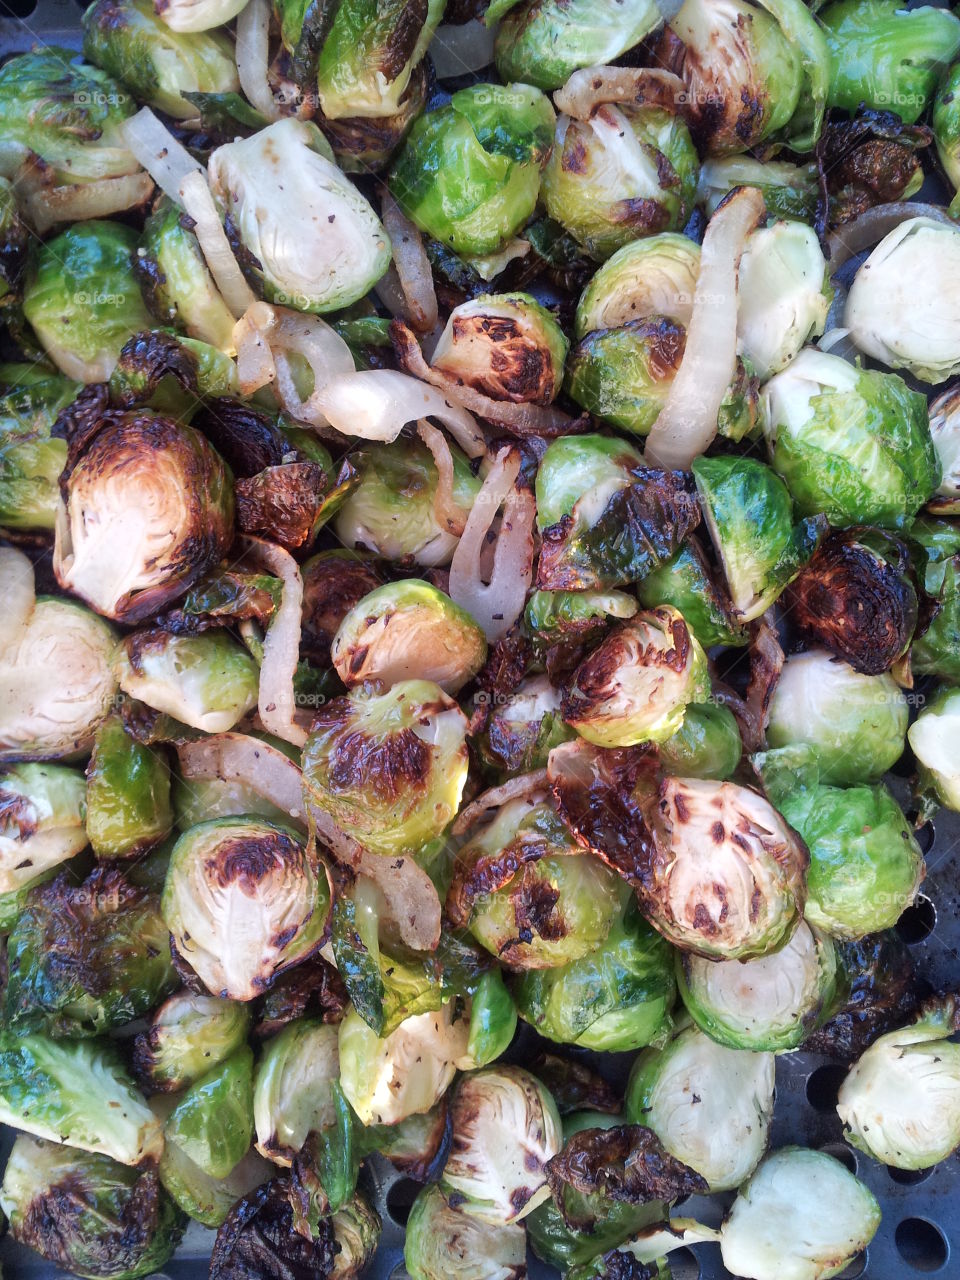 Brussel sprouts on the grill